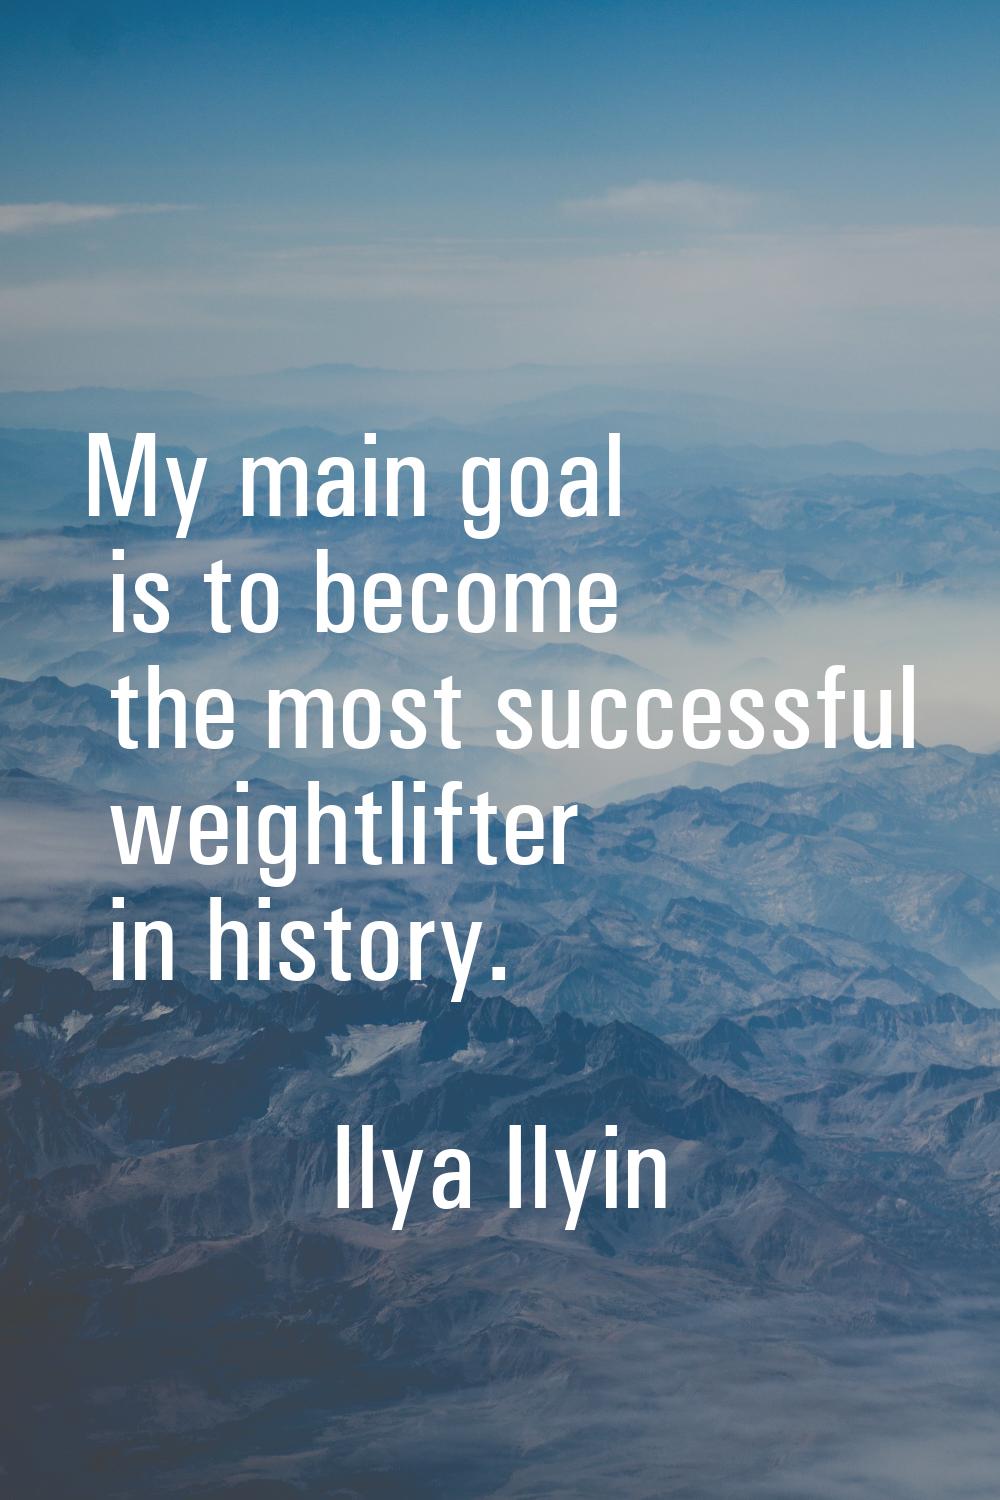 My main goal is to become the most successful weightlifter in history.